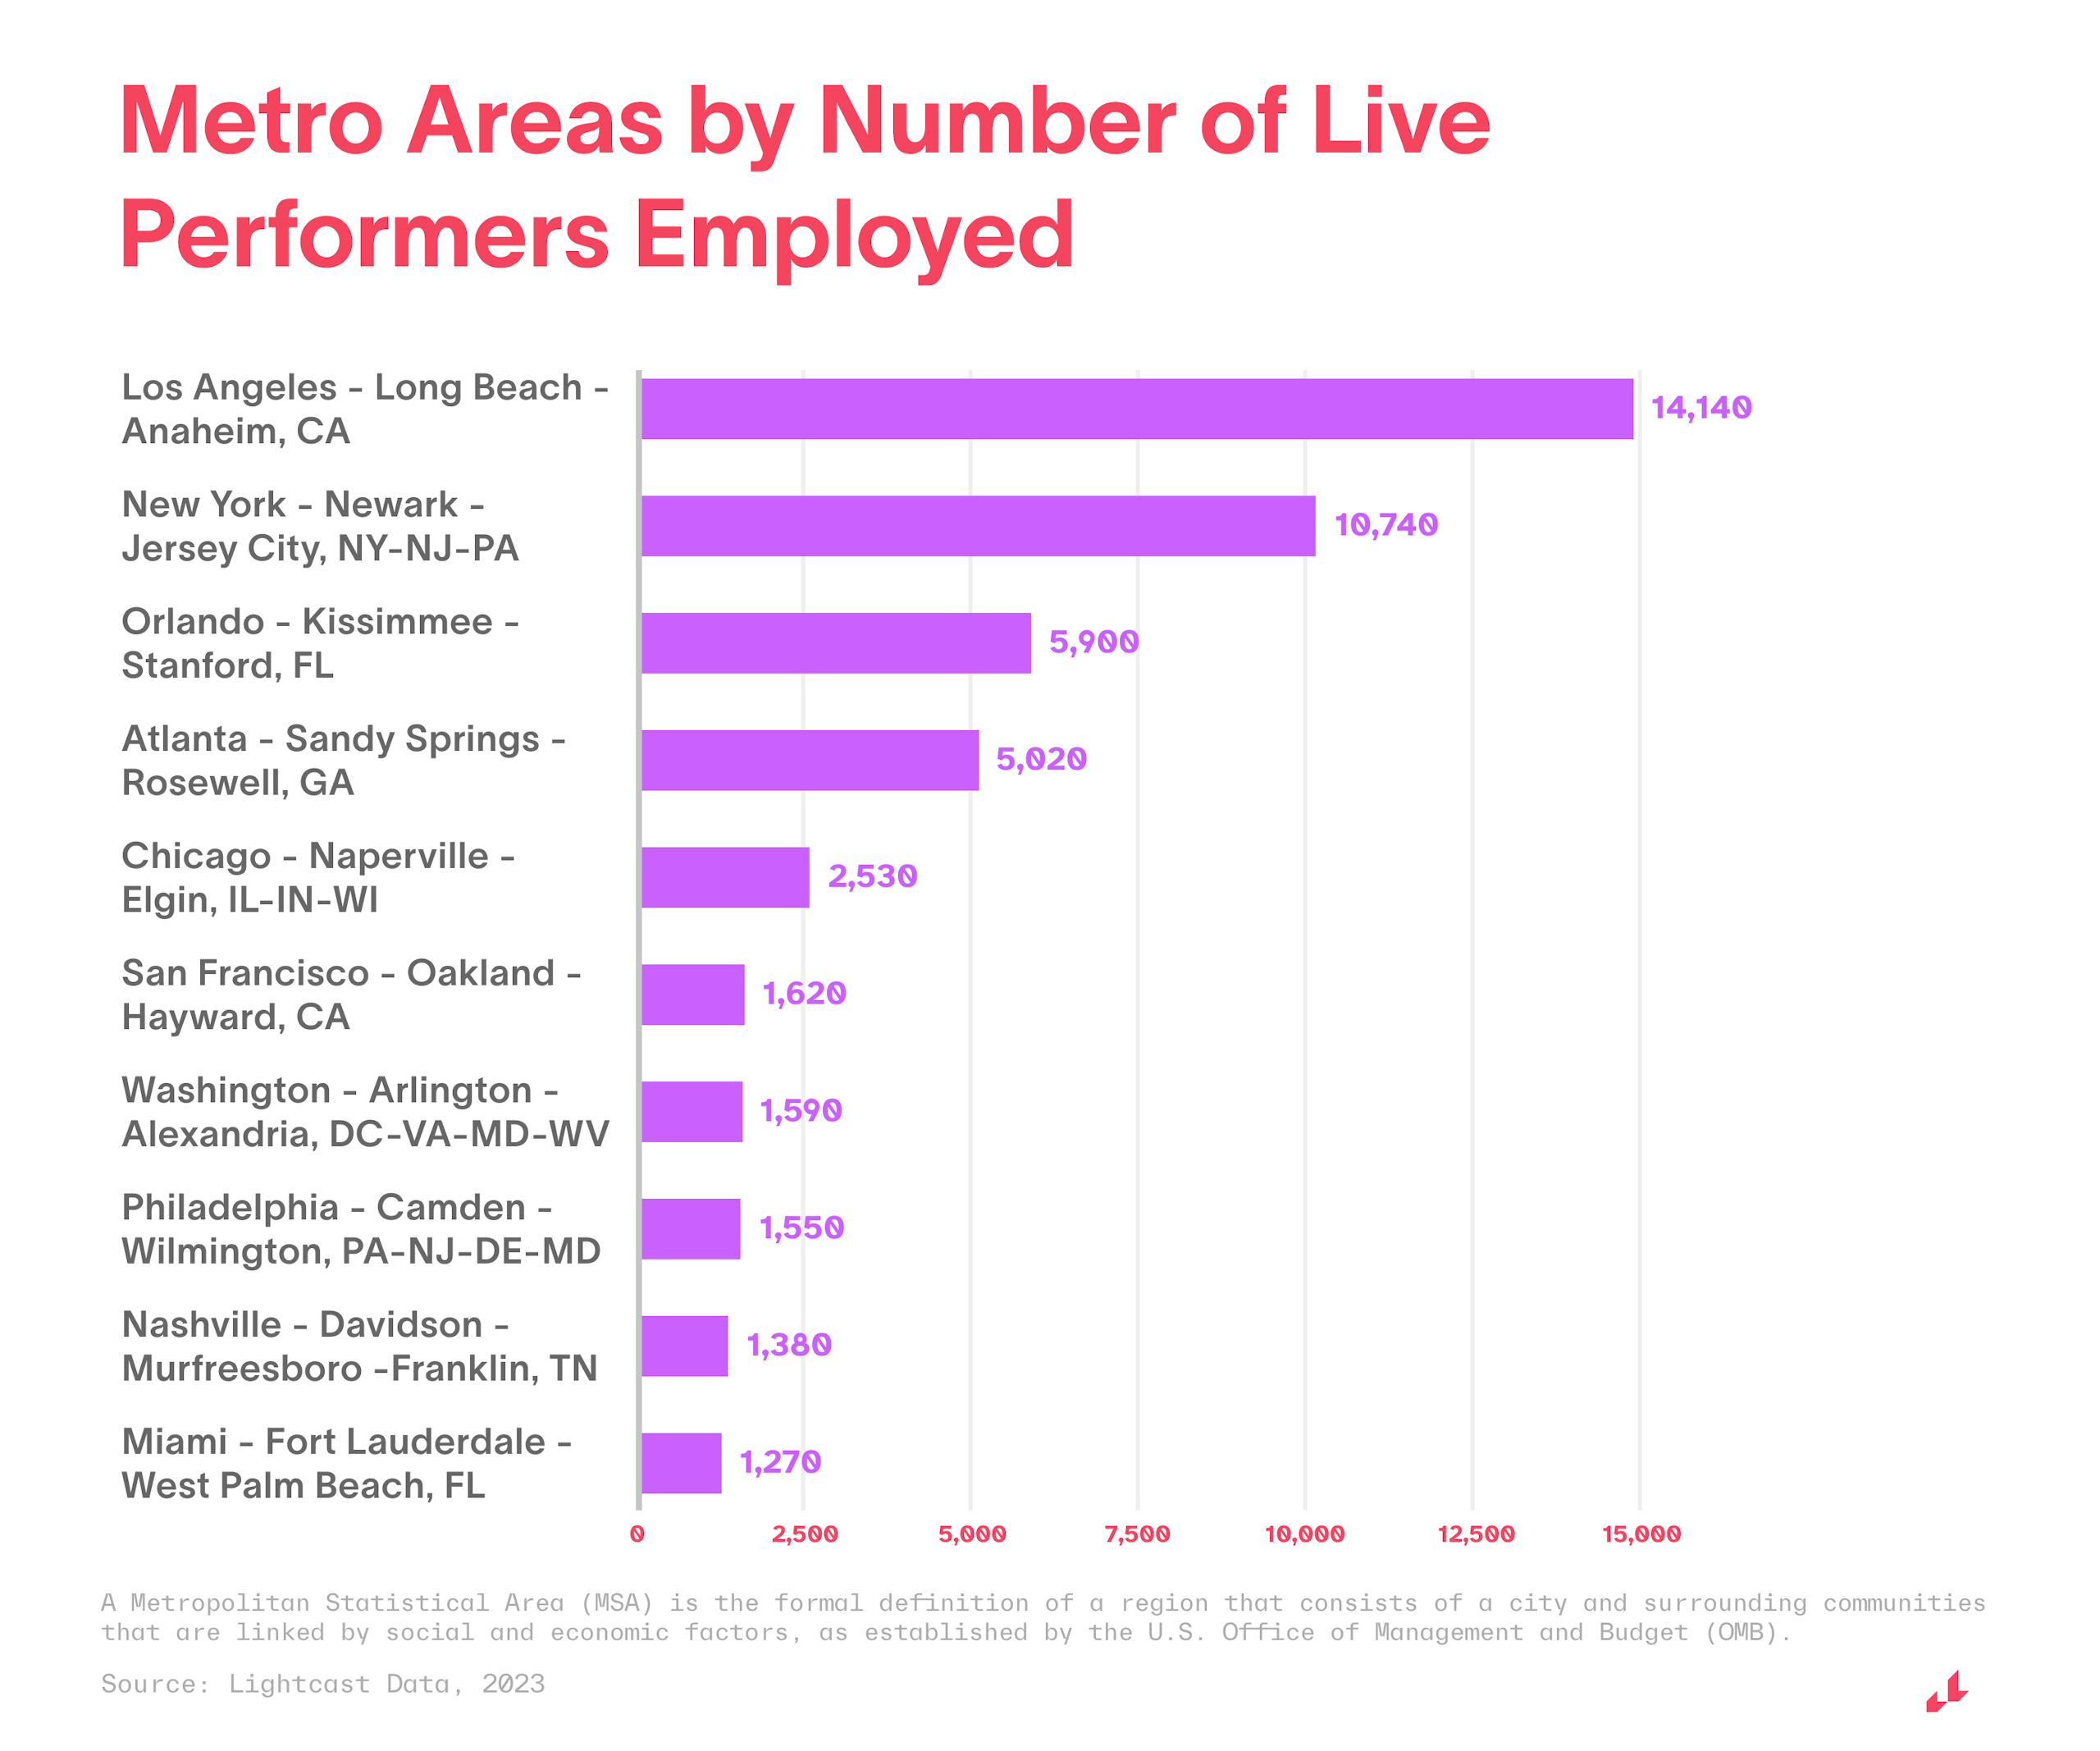 Metro areas by number of live performers employed